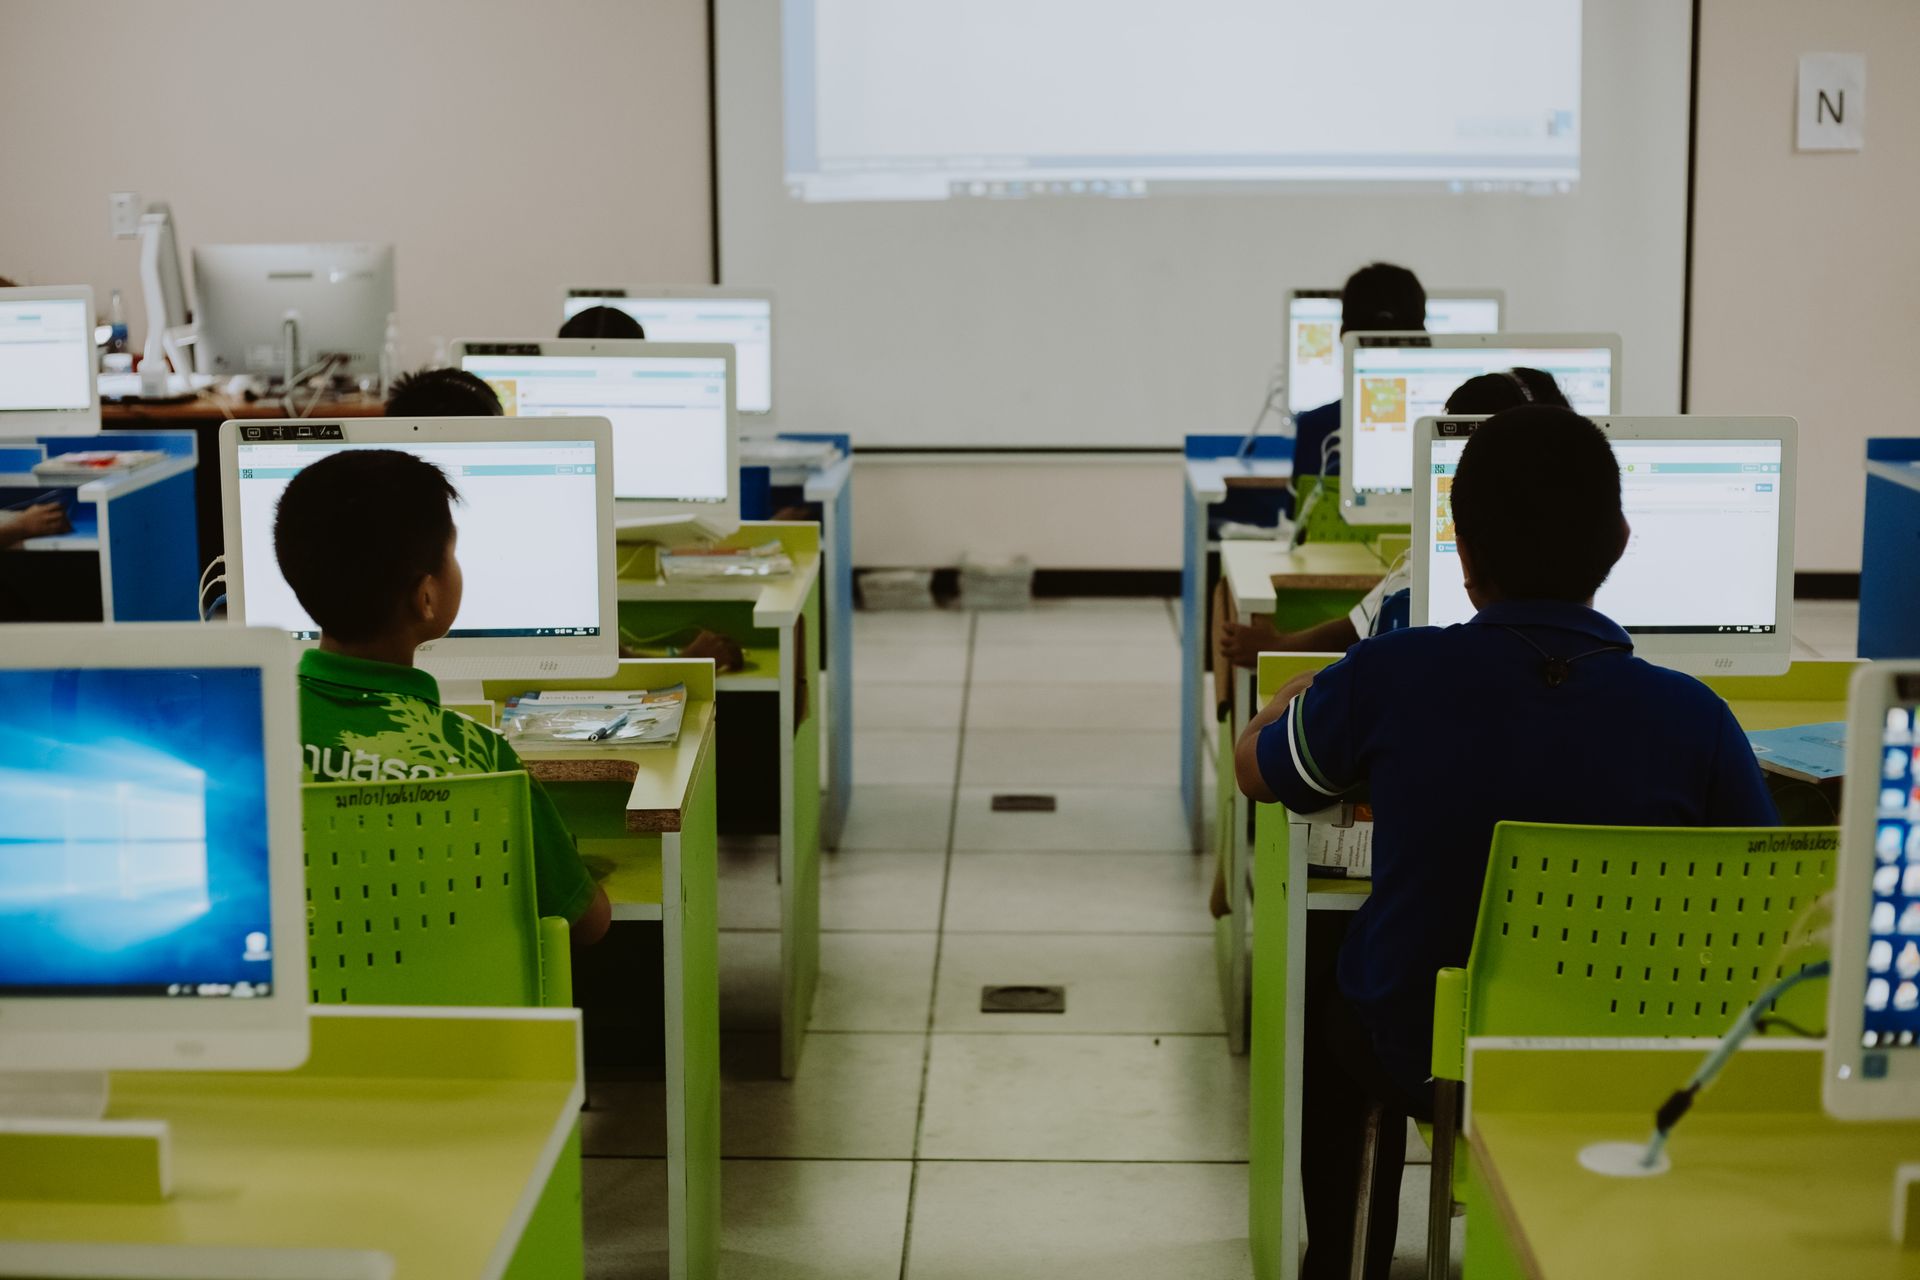 A group of children are sitting at desks in front of computer monitors in a classroom.